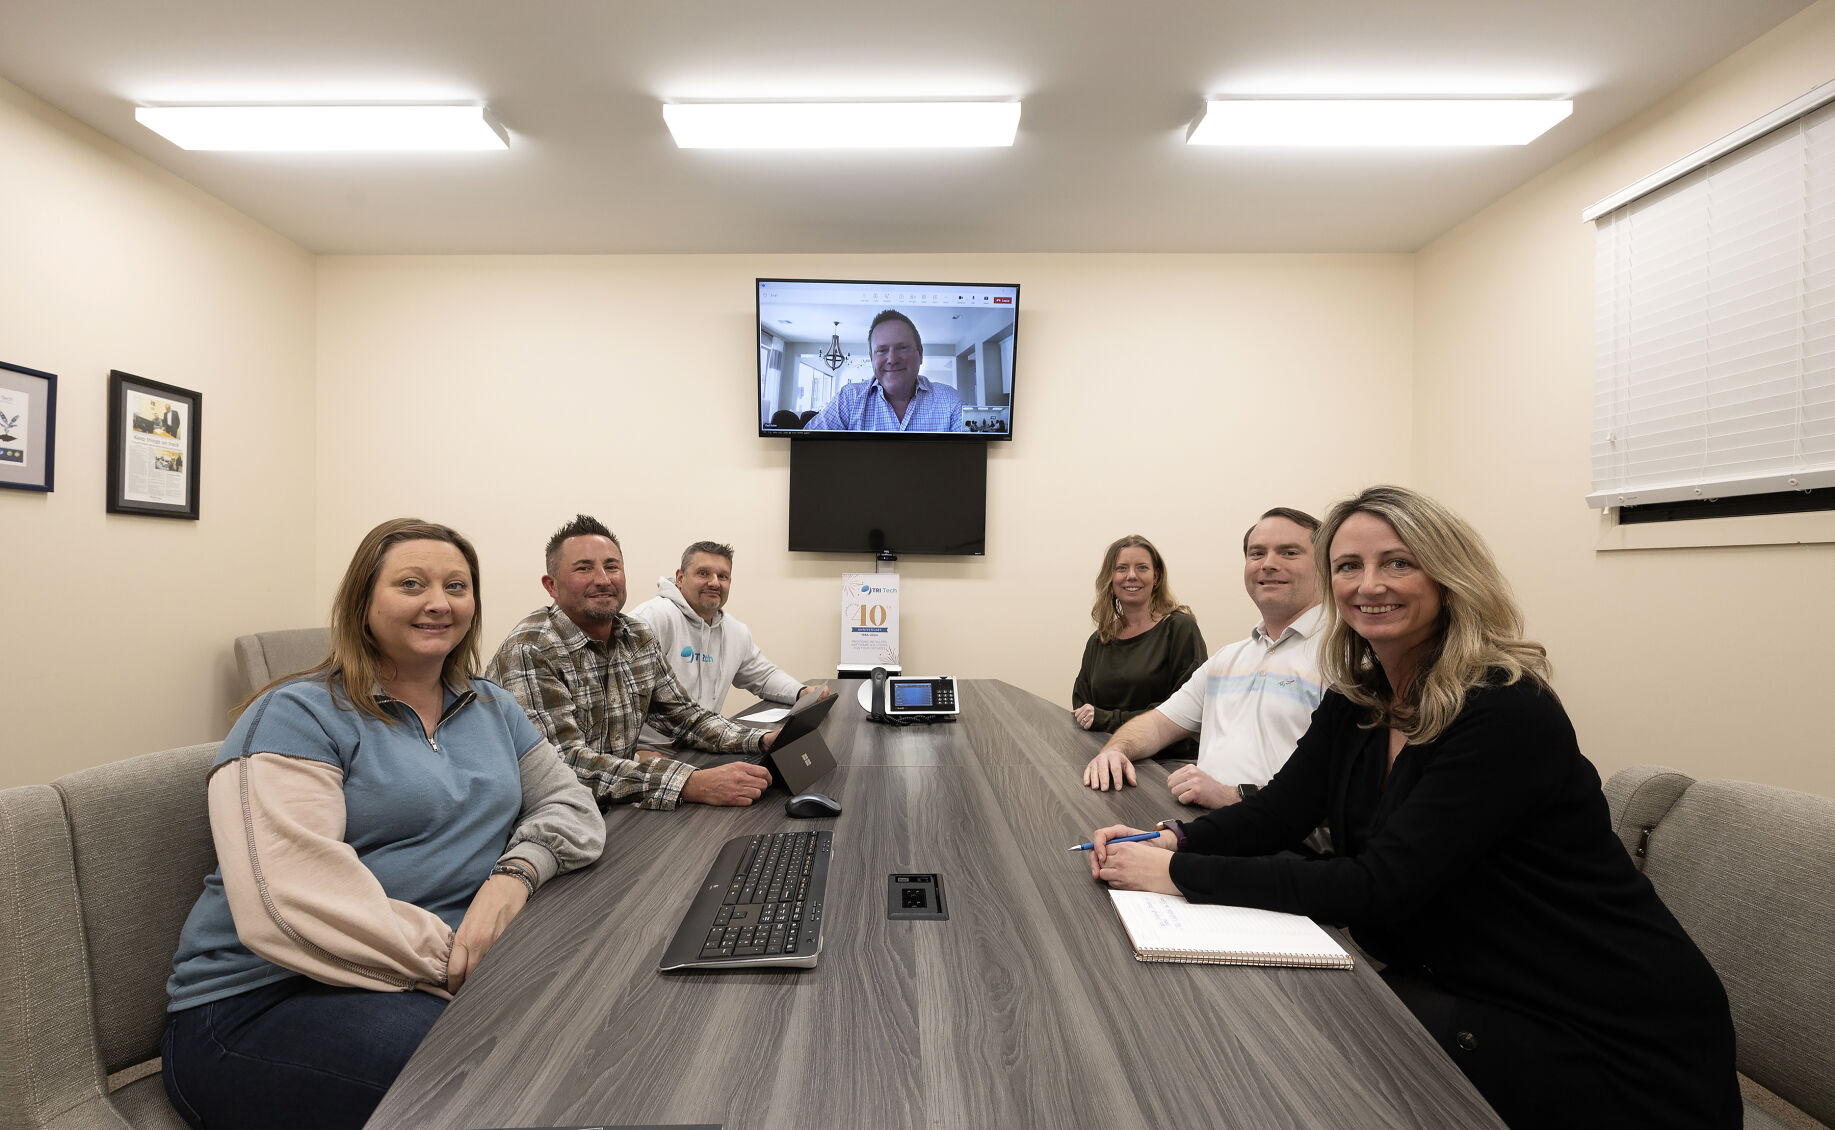 The Tri-Tech management team (from left): Jill Chapman-Cox, production manager; Greg Cox, chief operating officer; Brett Stoffel, director of customer service; Paul Acton (on screen), chief executive officer; Amber Earles, director of project management; Will Livesay, business technology consultant; and Kathryn Lyness, marketing manager. Tri-Tech is celebrating 40 years in business this year.    PHOTO CREDIT: Stephen Gassman
Telegraph Herald